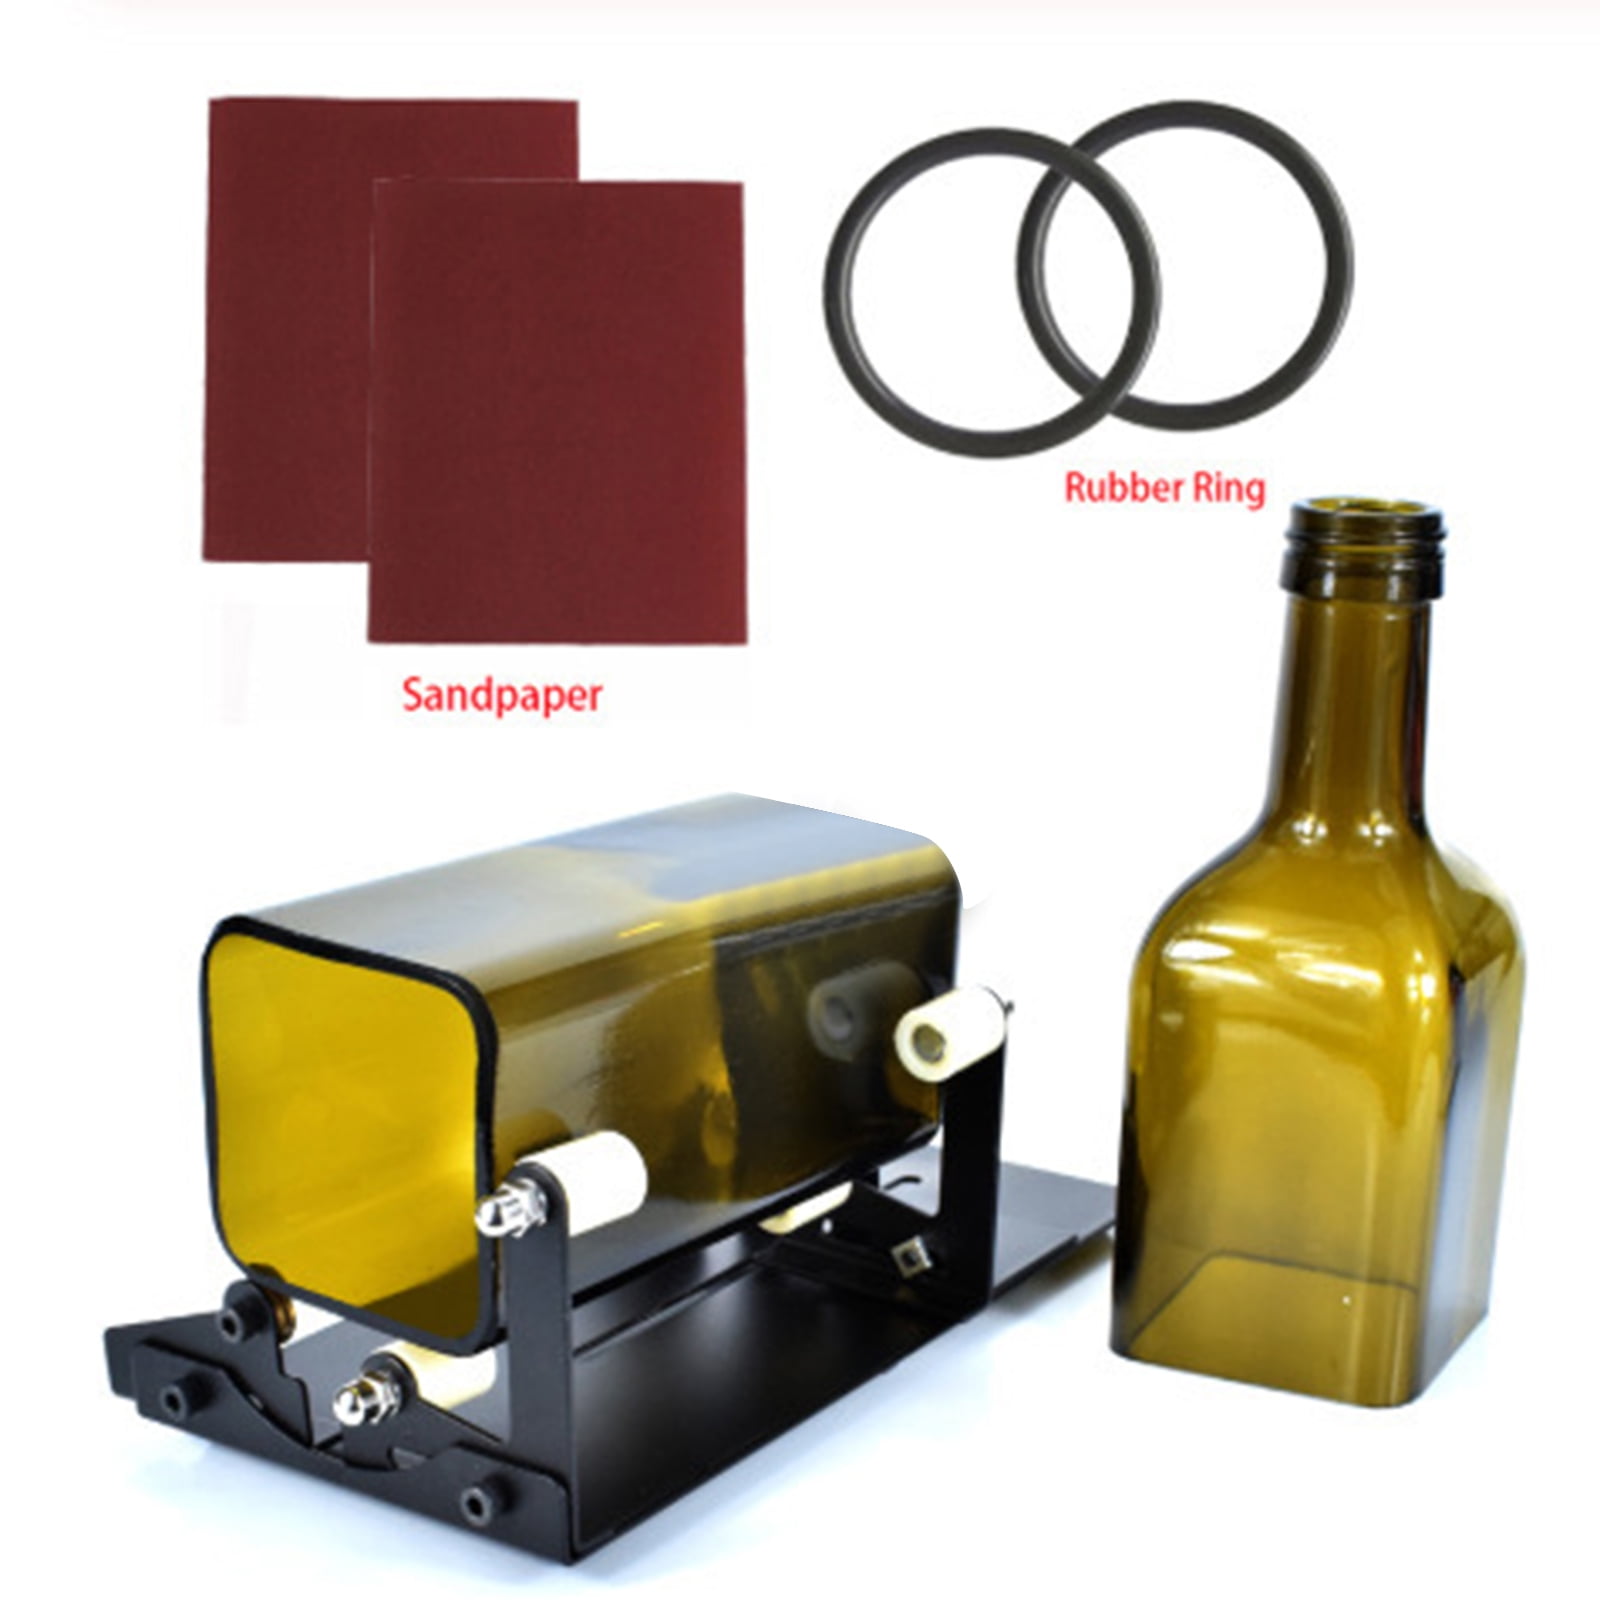 Square and round bottle cutter kit with accessories tool, suitable for